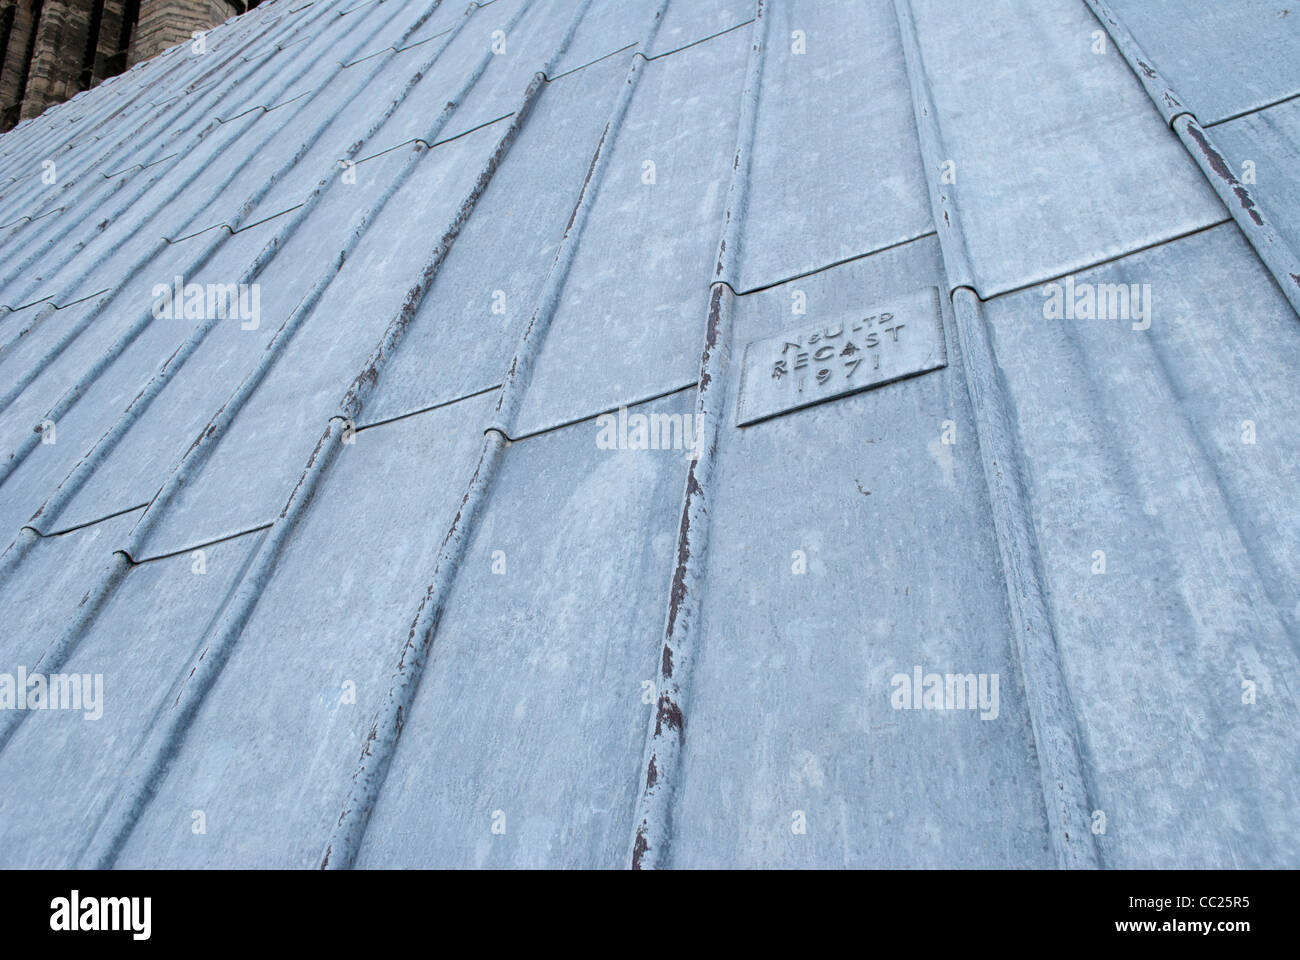 Lead roof of the nave of Lincoln Cathedral with 'N & U RECAST 1971' Stock Photo